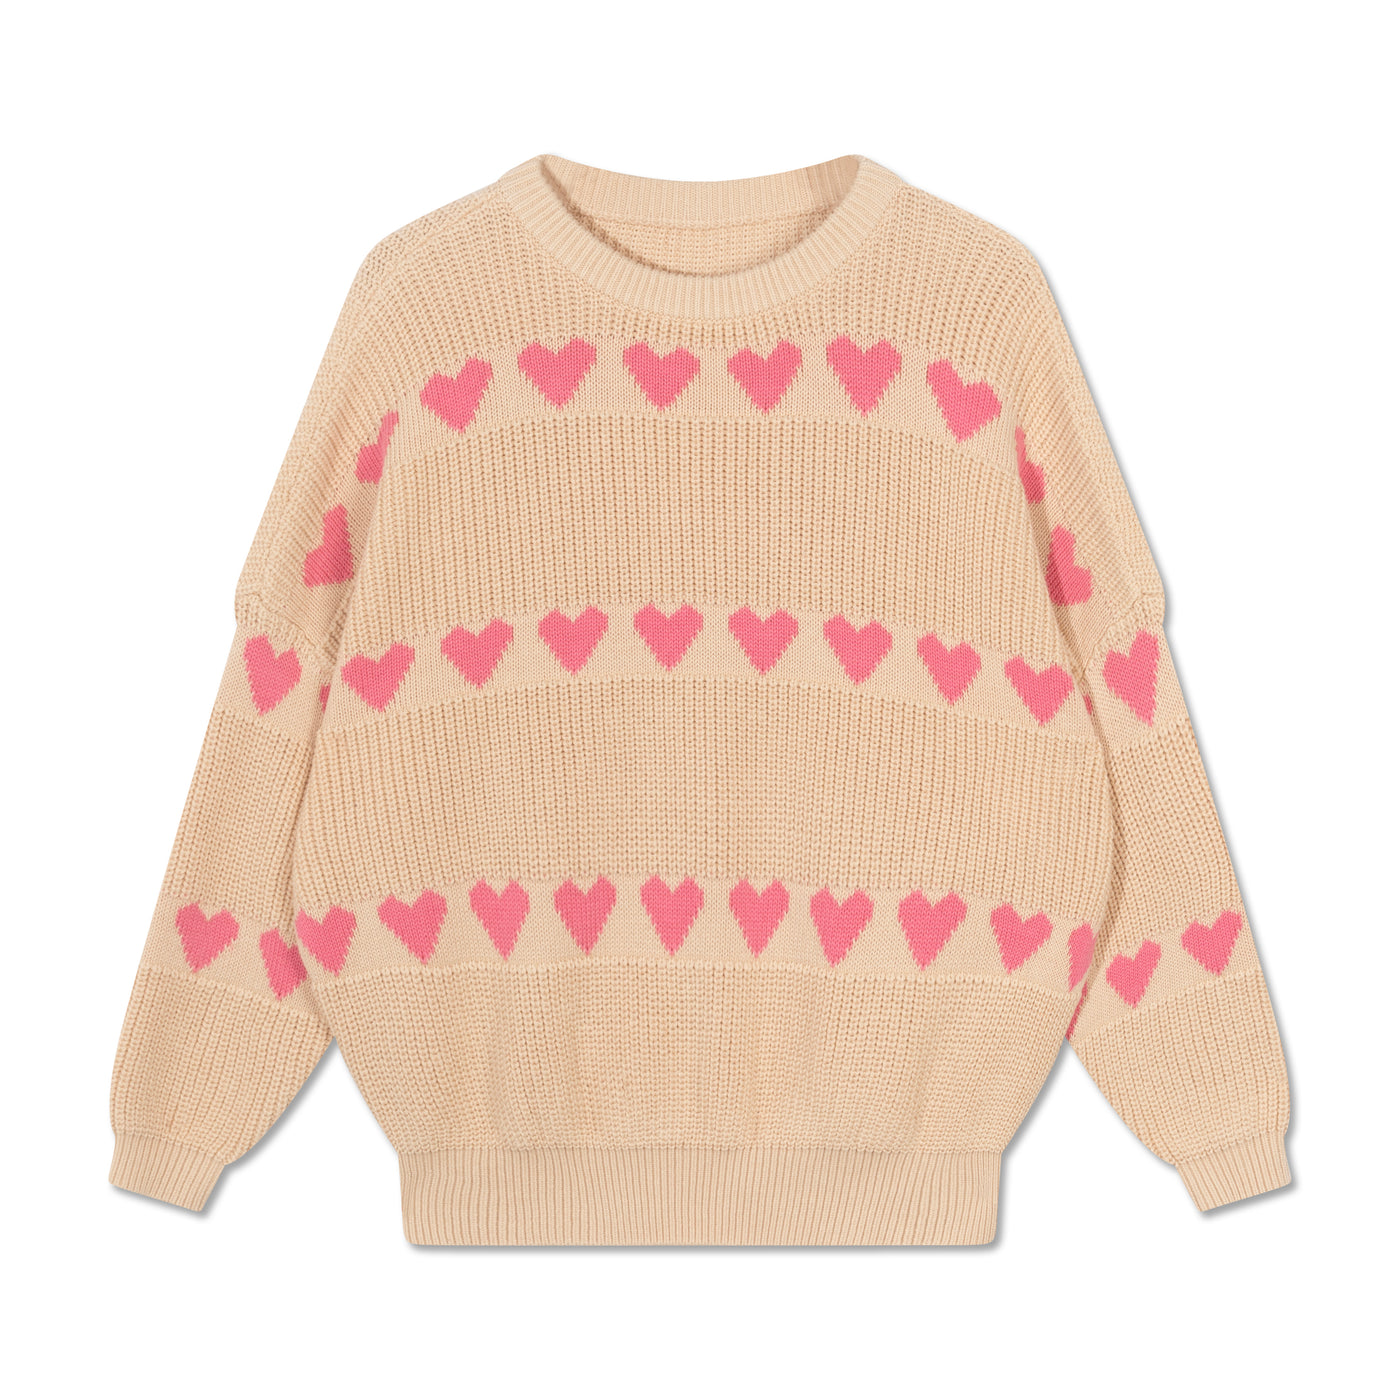 knit slouchy sweater - hearts